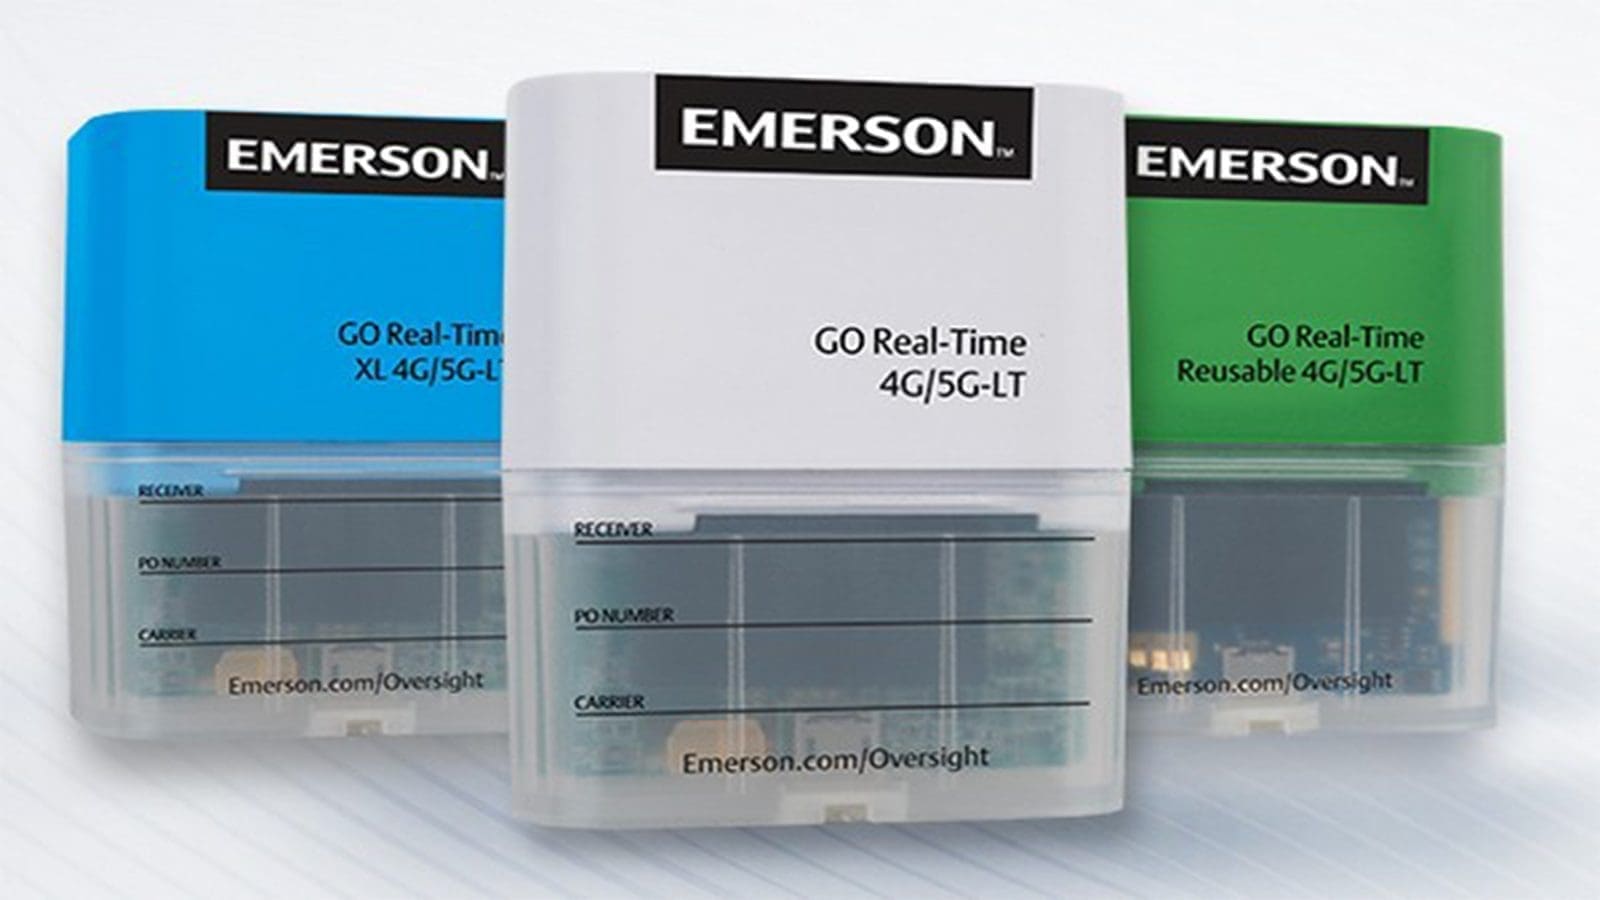 Emerson launches GO real-time 4G/5G-LT to monitor in-transit temperature of perishable goods